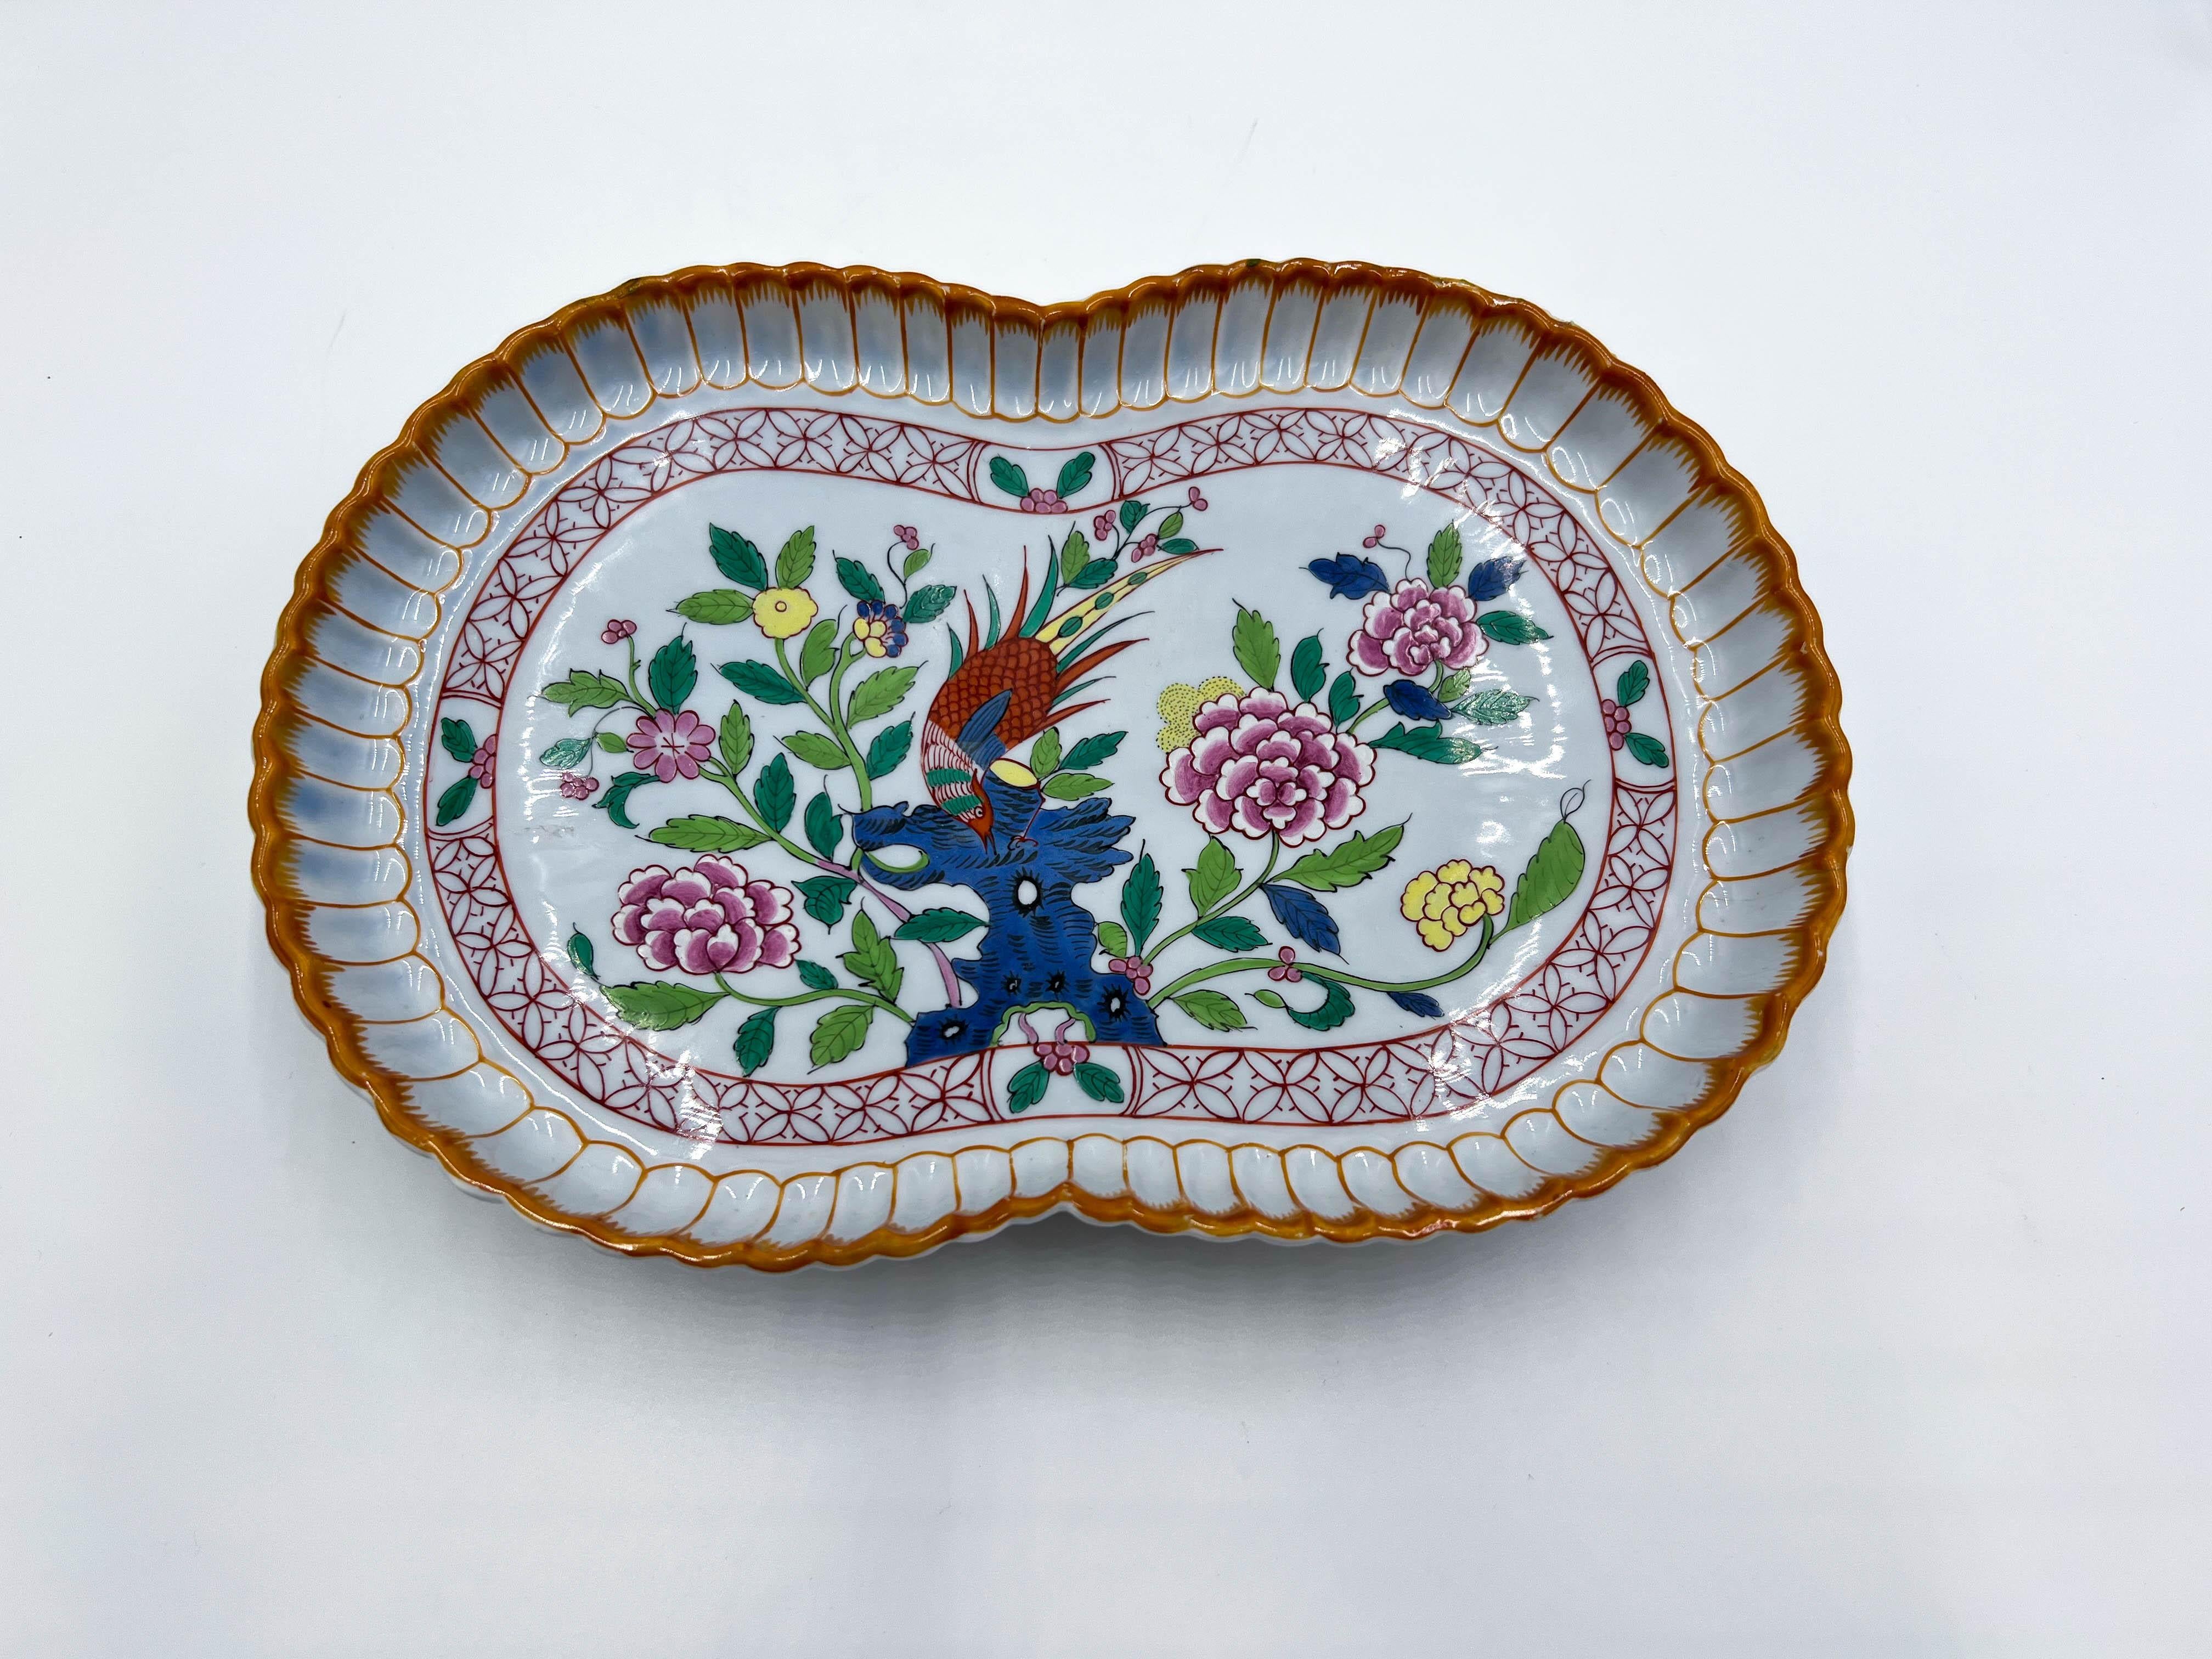  Herend porcelain is renowned for its exquisite craftsmanship and intricate designs. However, this piece stands out even among the remarkable creations of the brand.

The vibrant colors and the floral and pheasant design create a visually